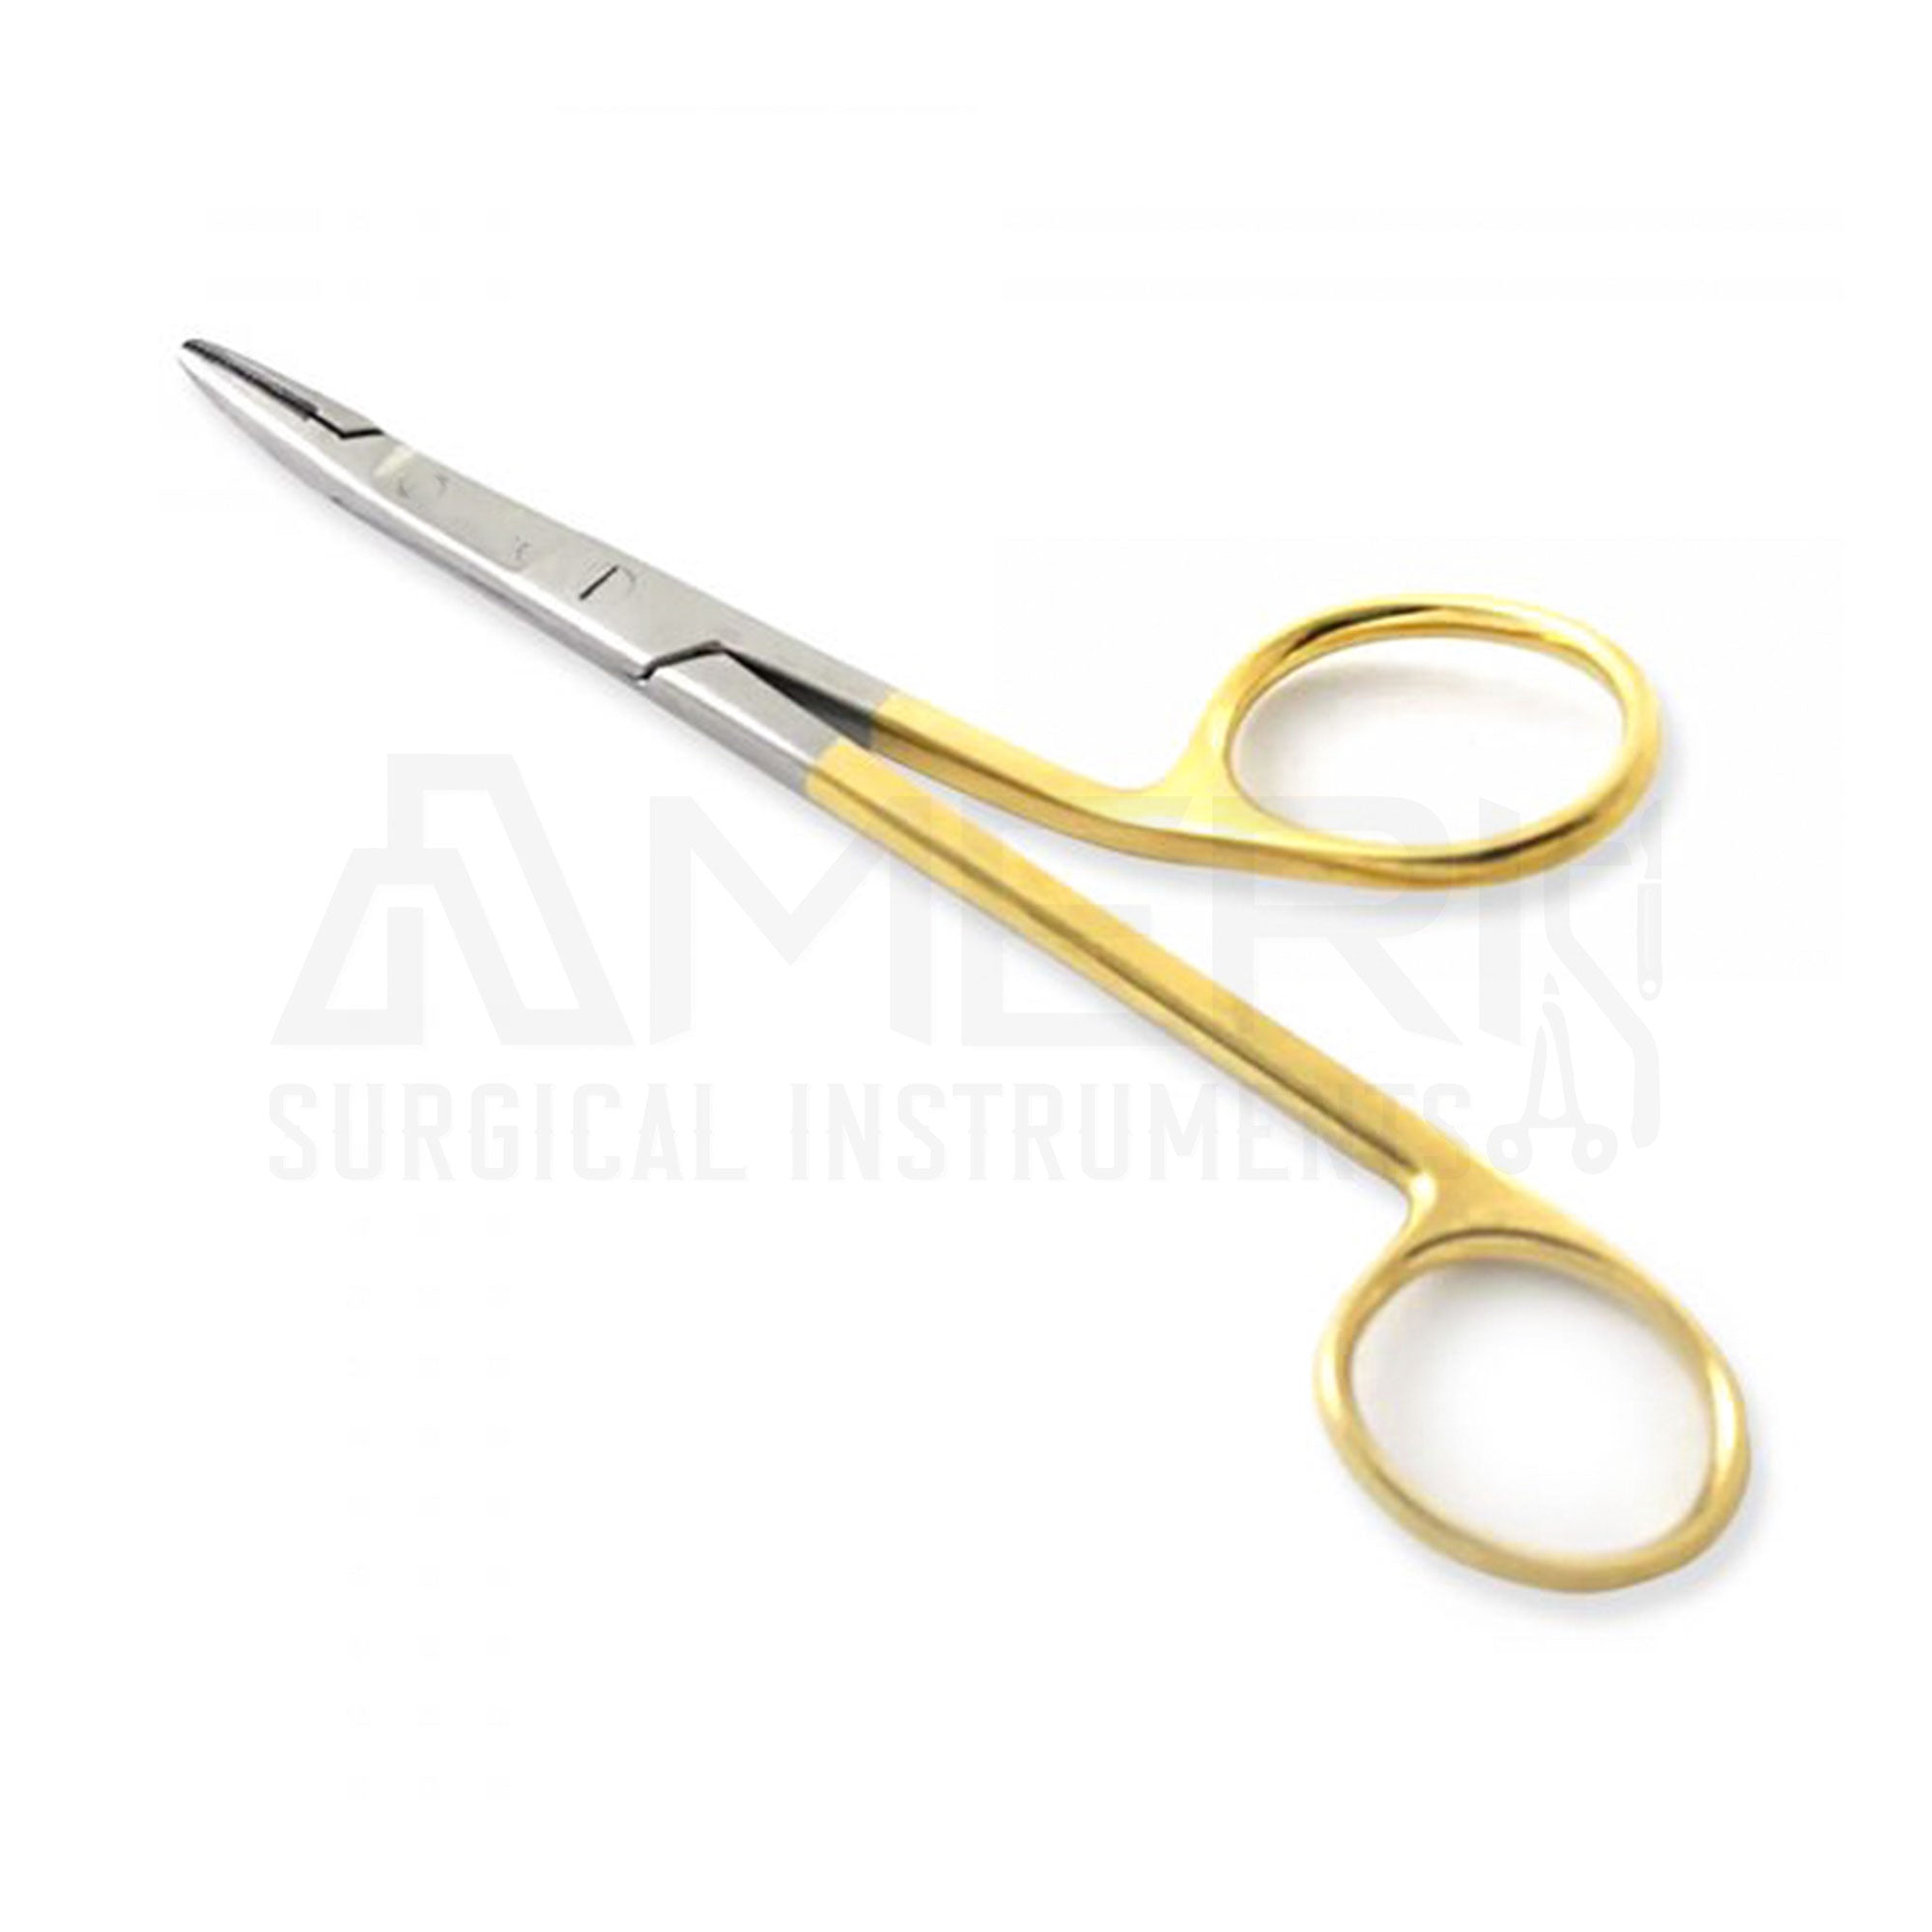 Foster Gillies Needle Holder - Ameri Surgical Instruments Inc.